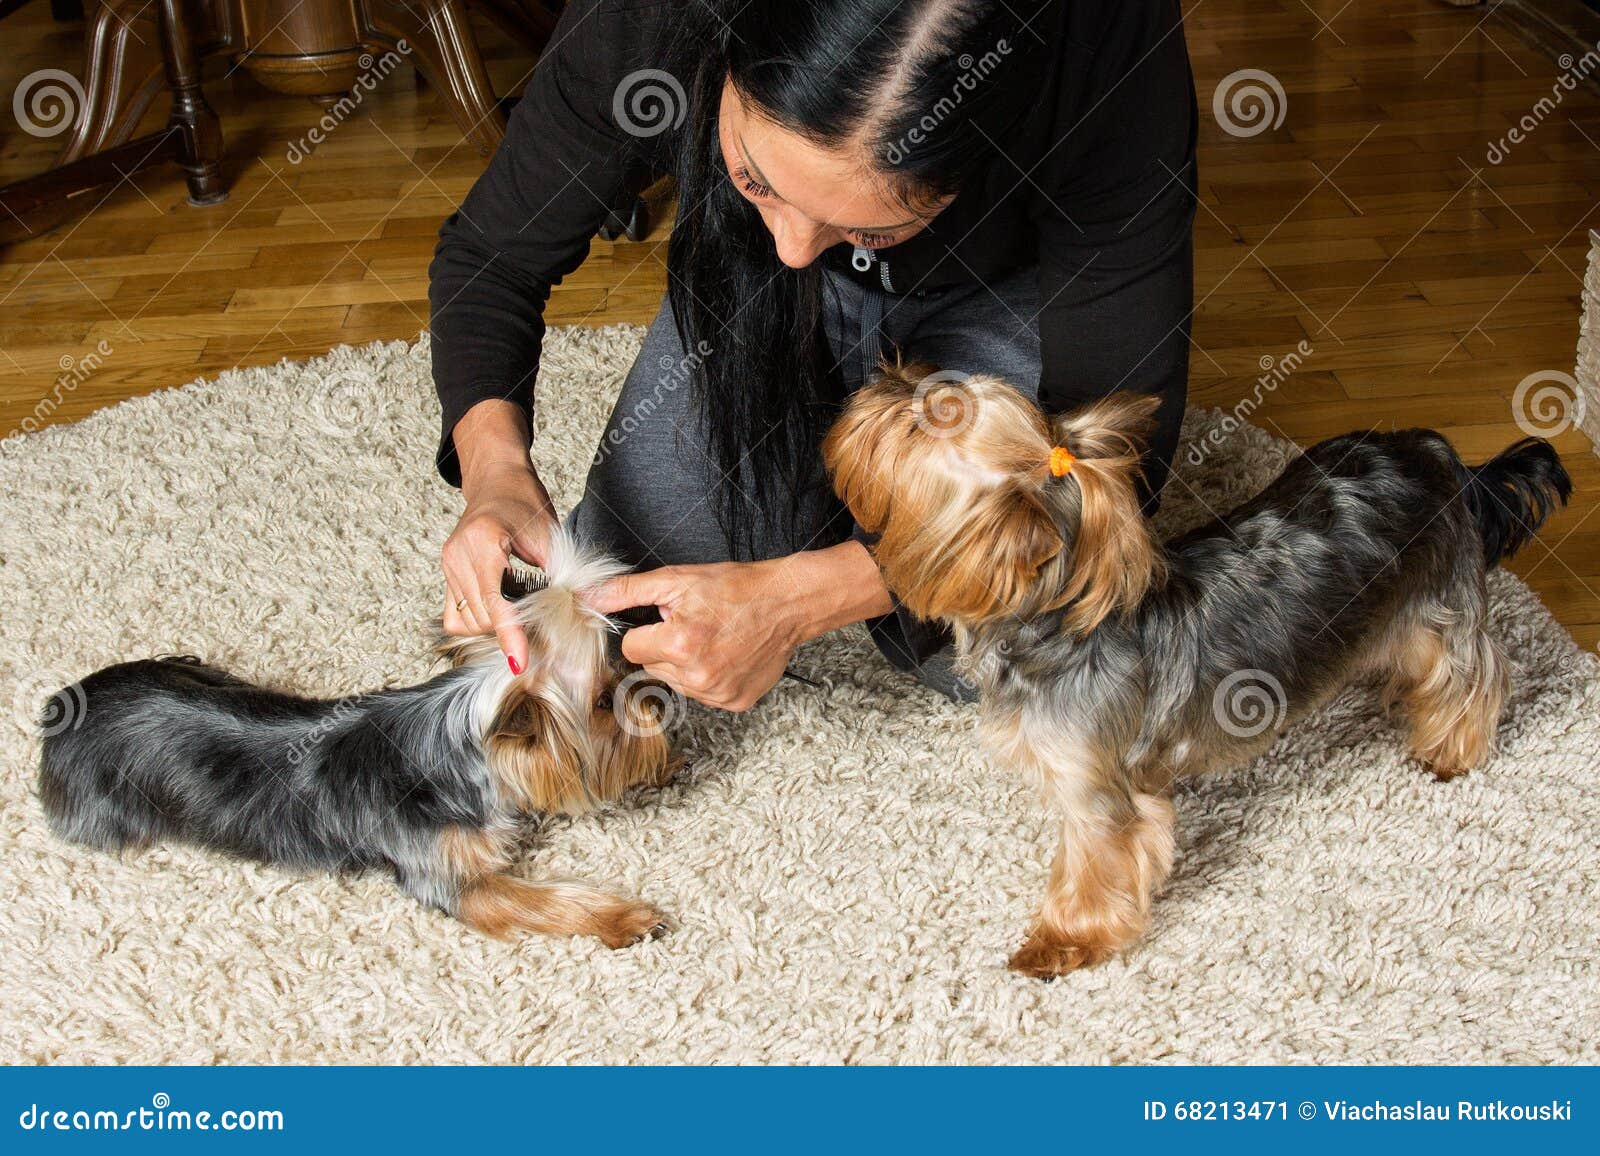 Dog knotting in woman